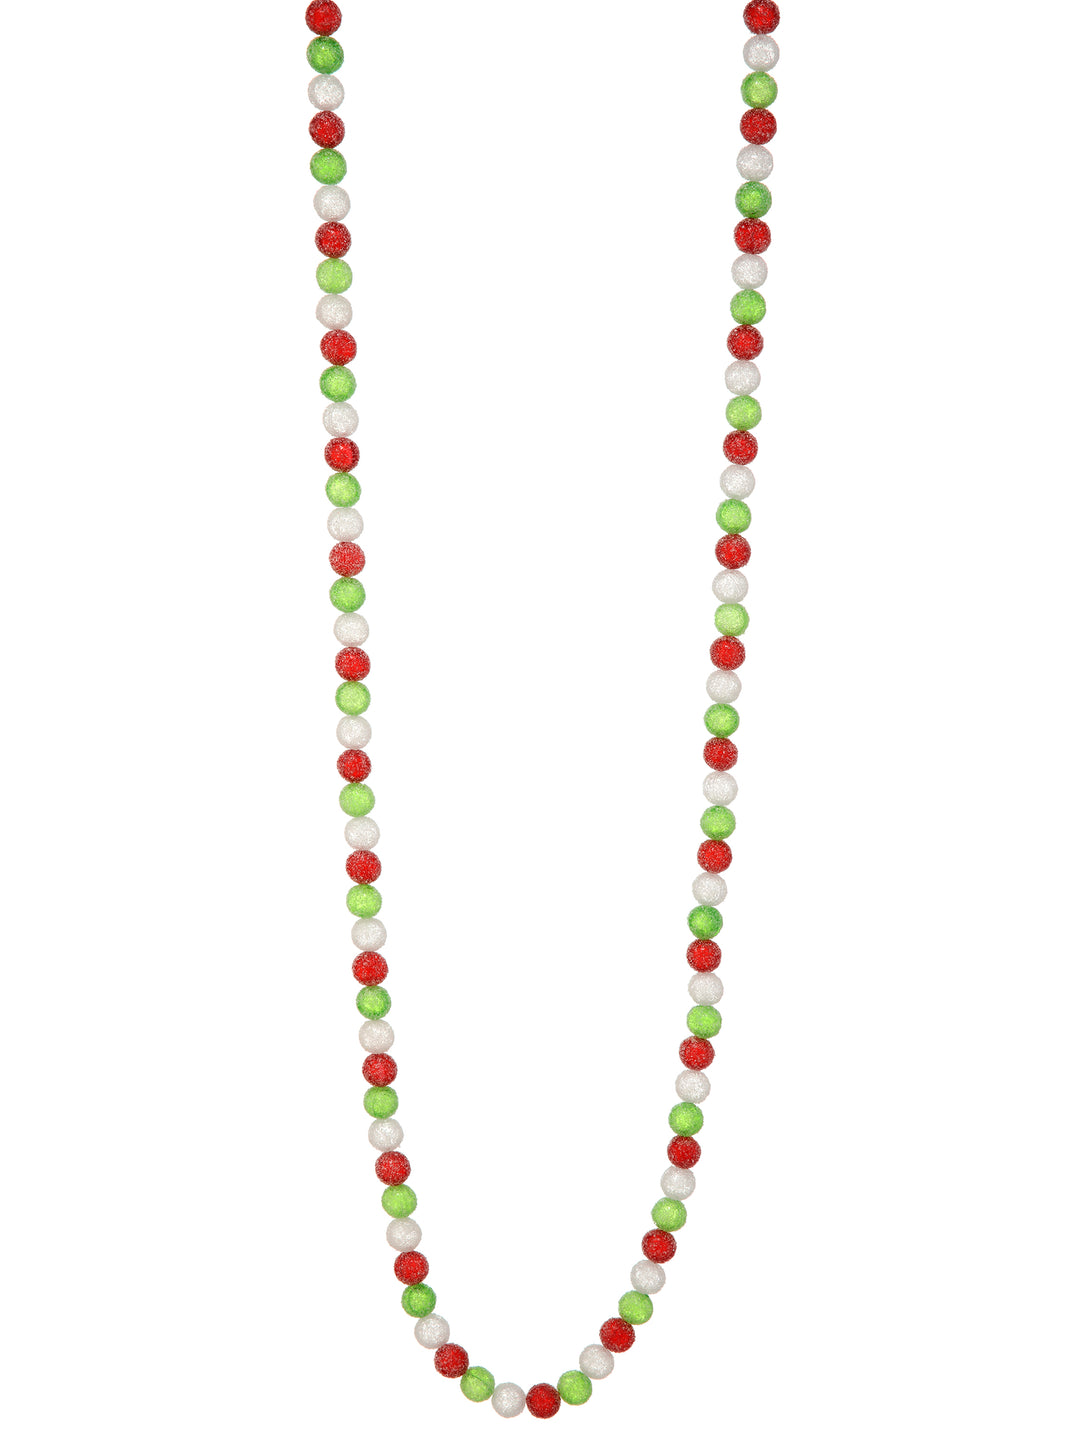 Regency 6' Sugared Candy Ball Garland in Red/White/Green